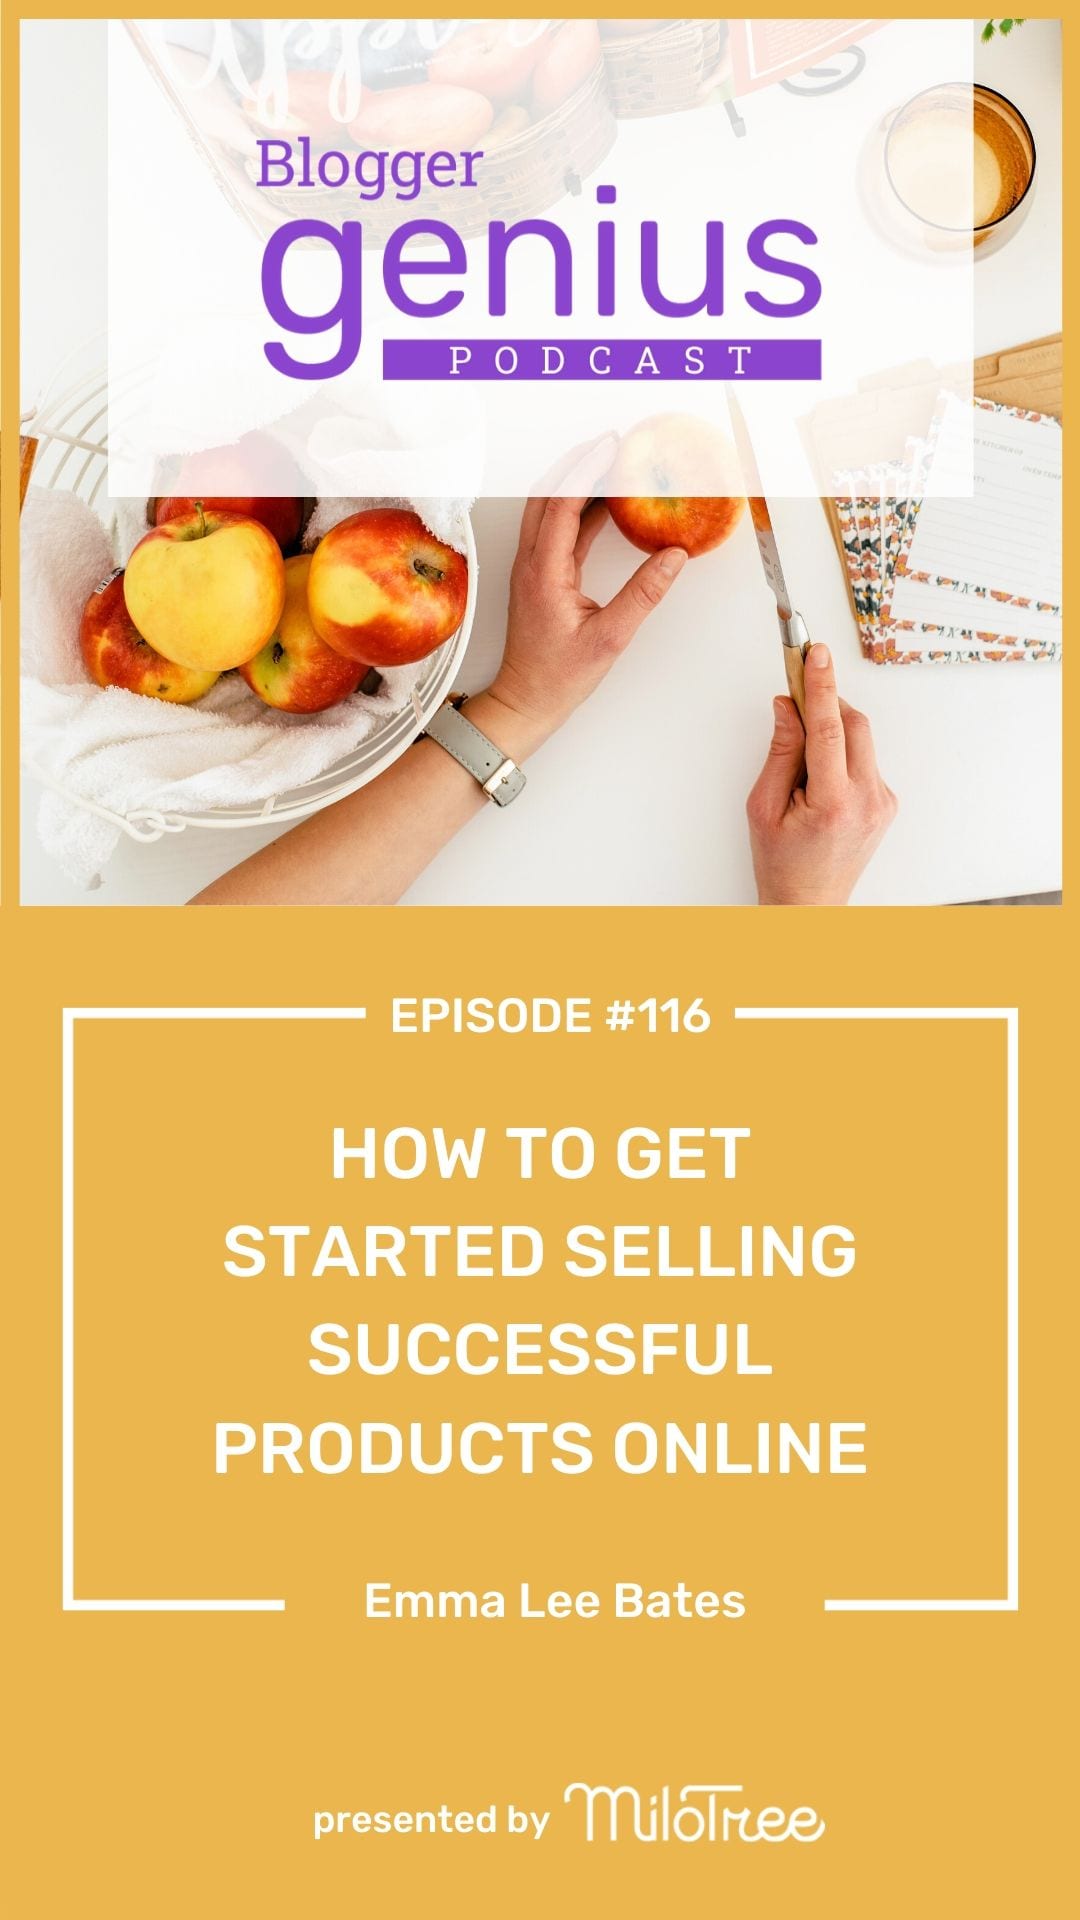 Getting Started as an  Seller